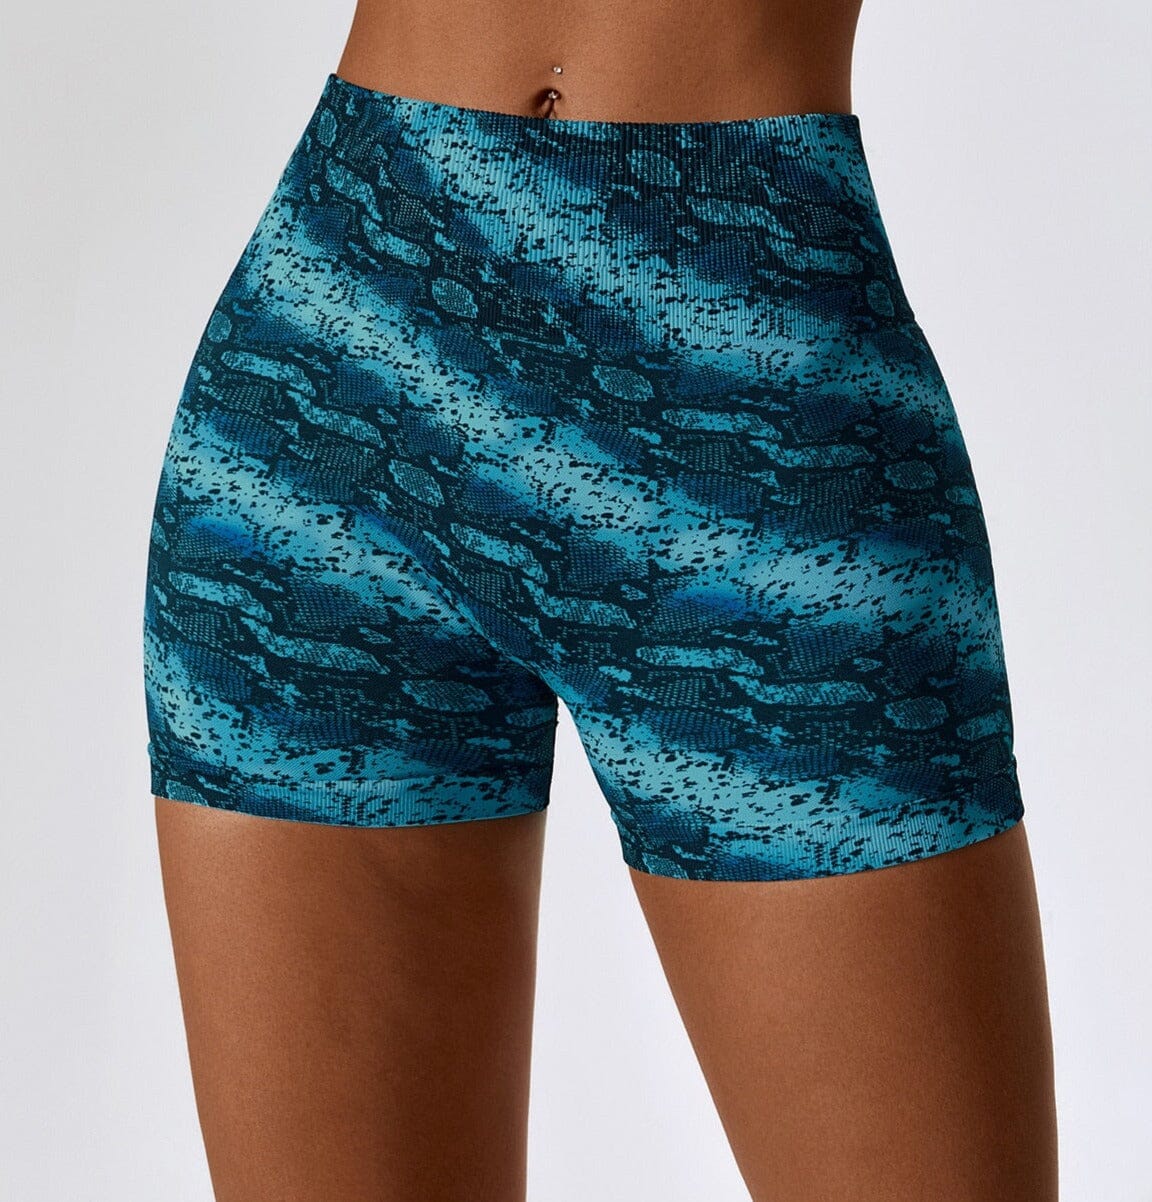 Ease Printed Seamless Shorts Shorts Starlethics Blue Leopard S 